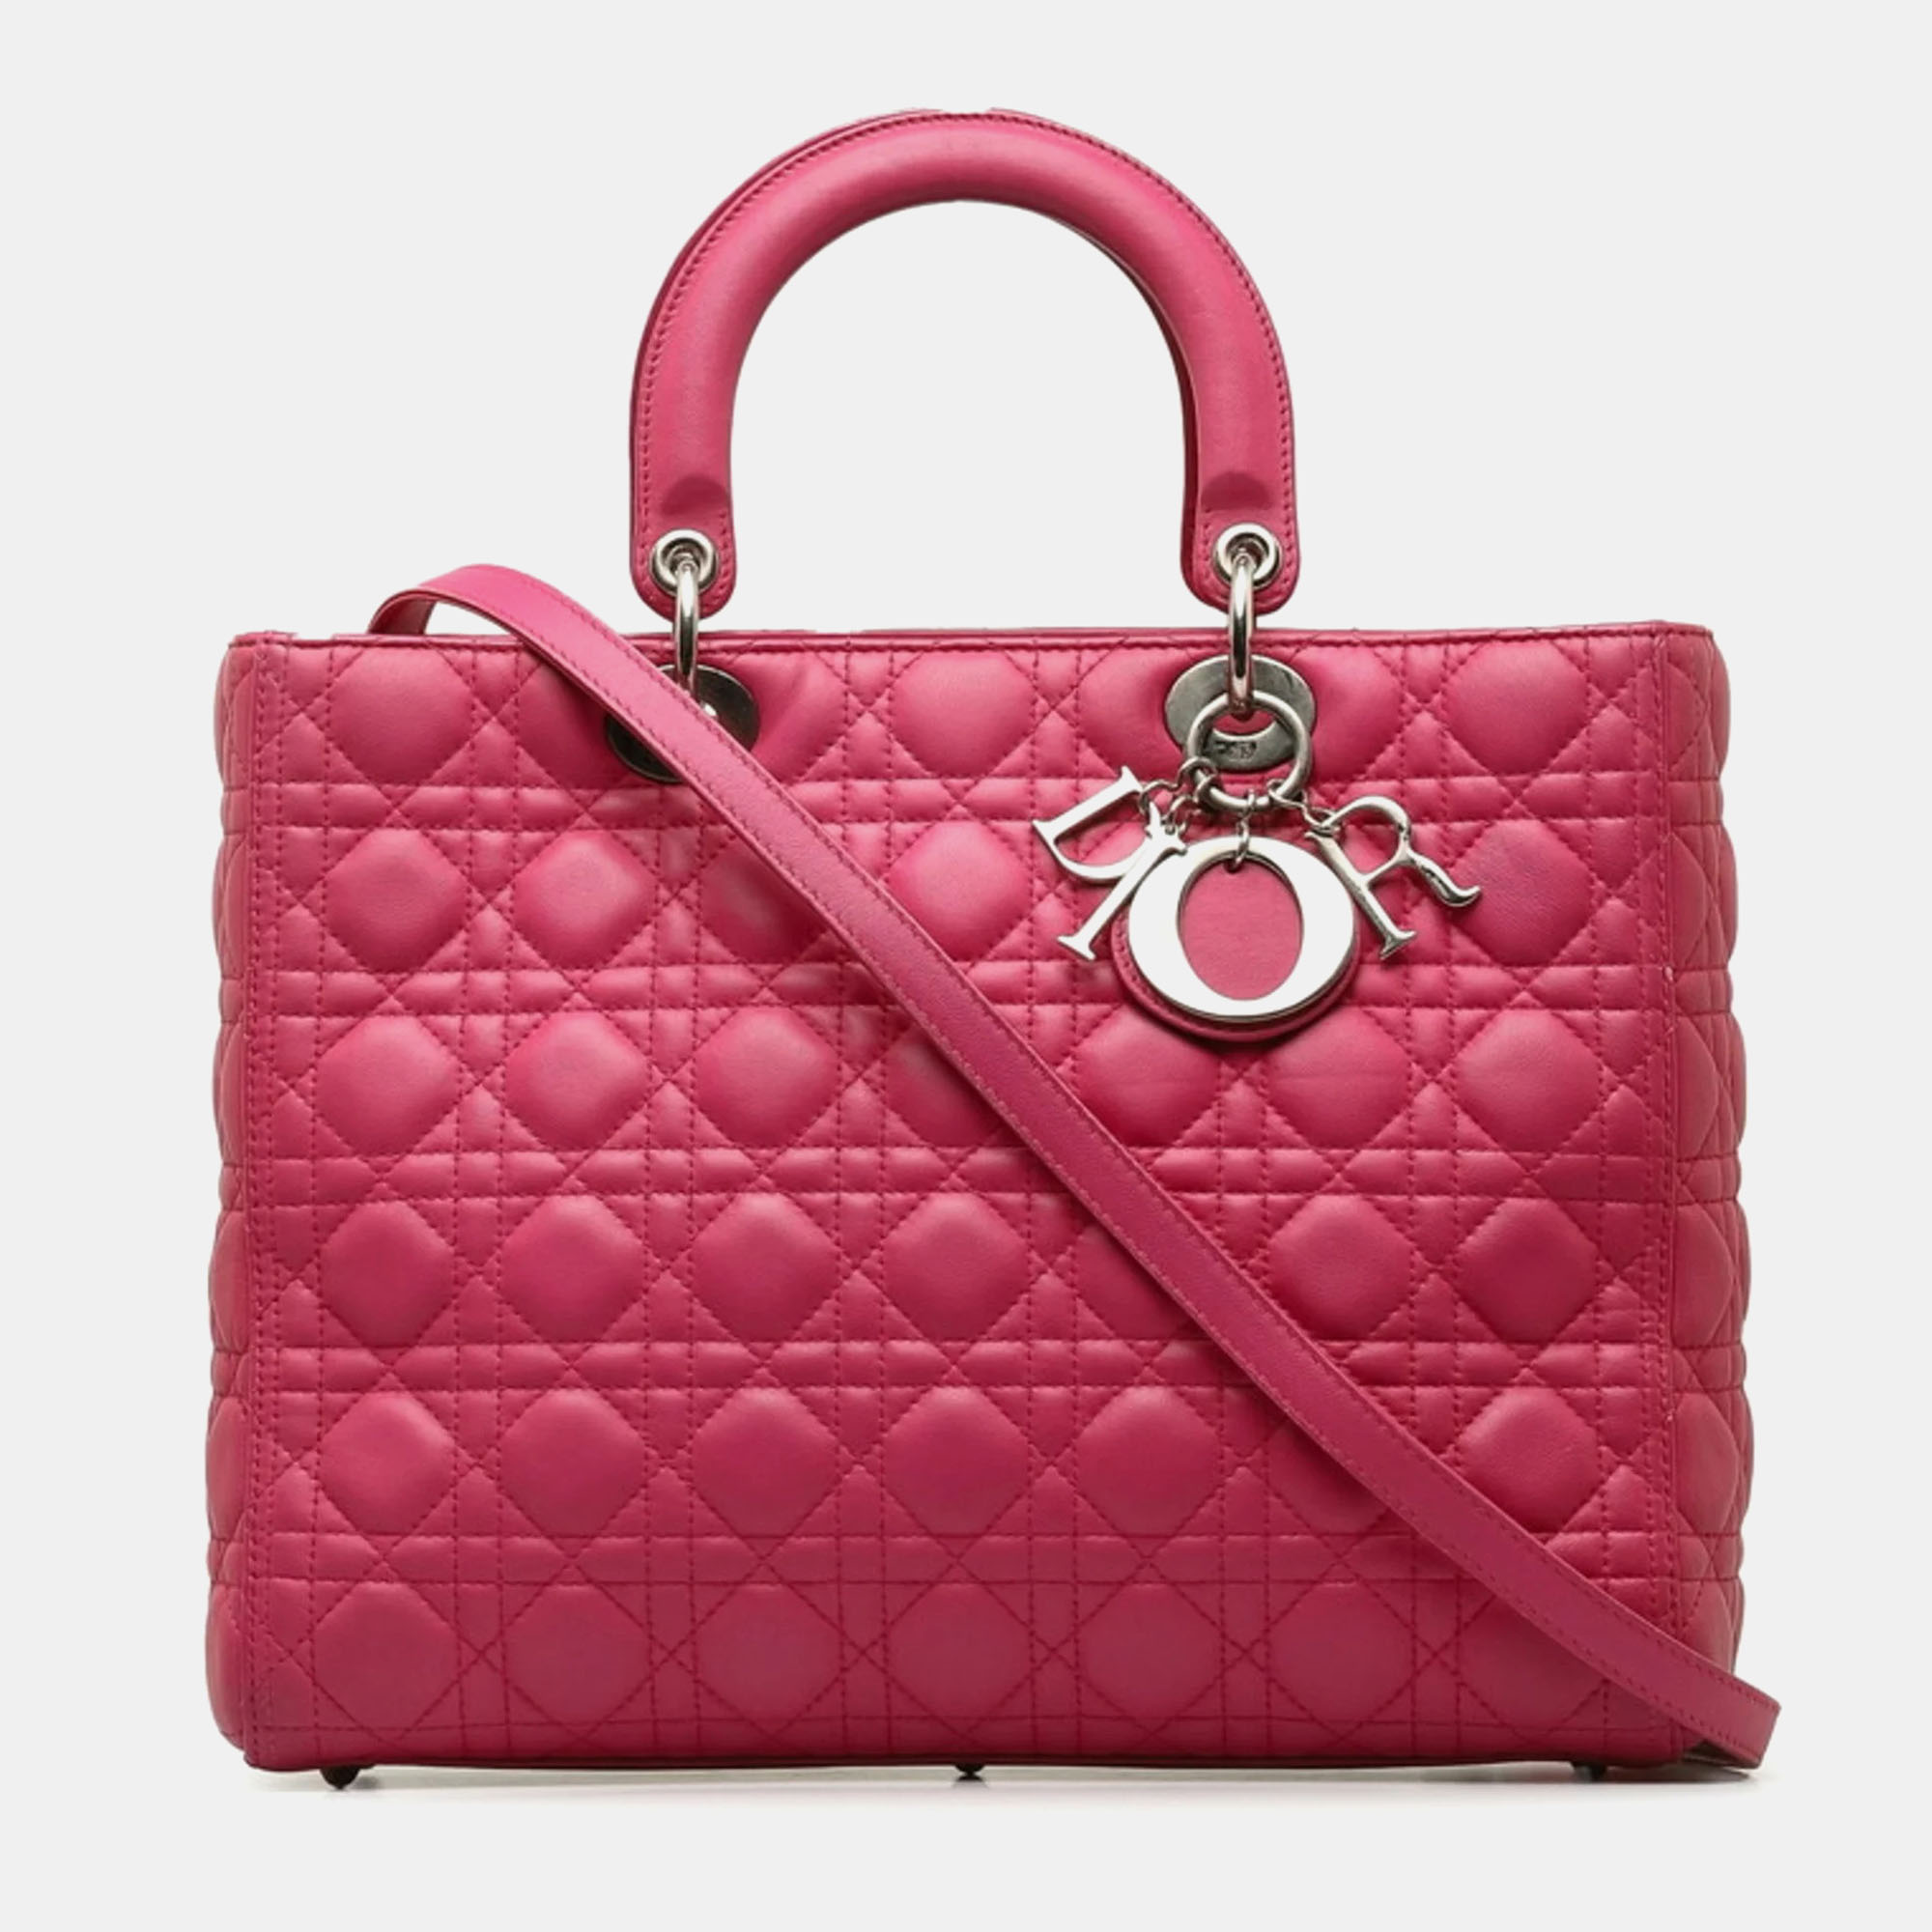 Dior pink leather large lady dior top handle bag